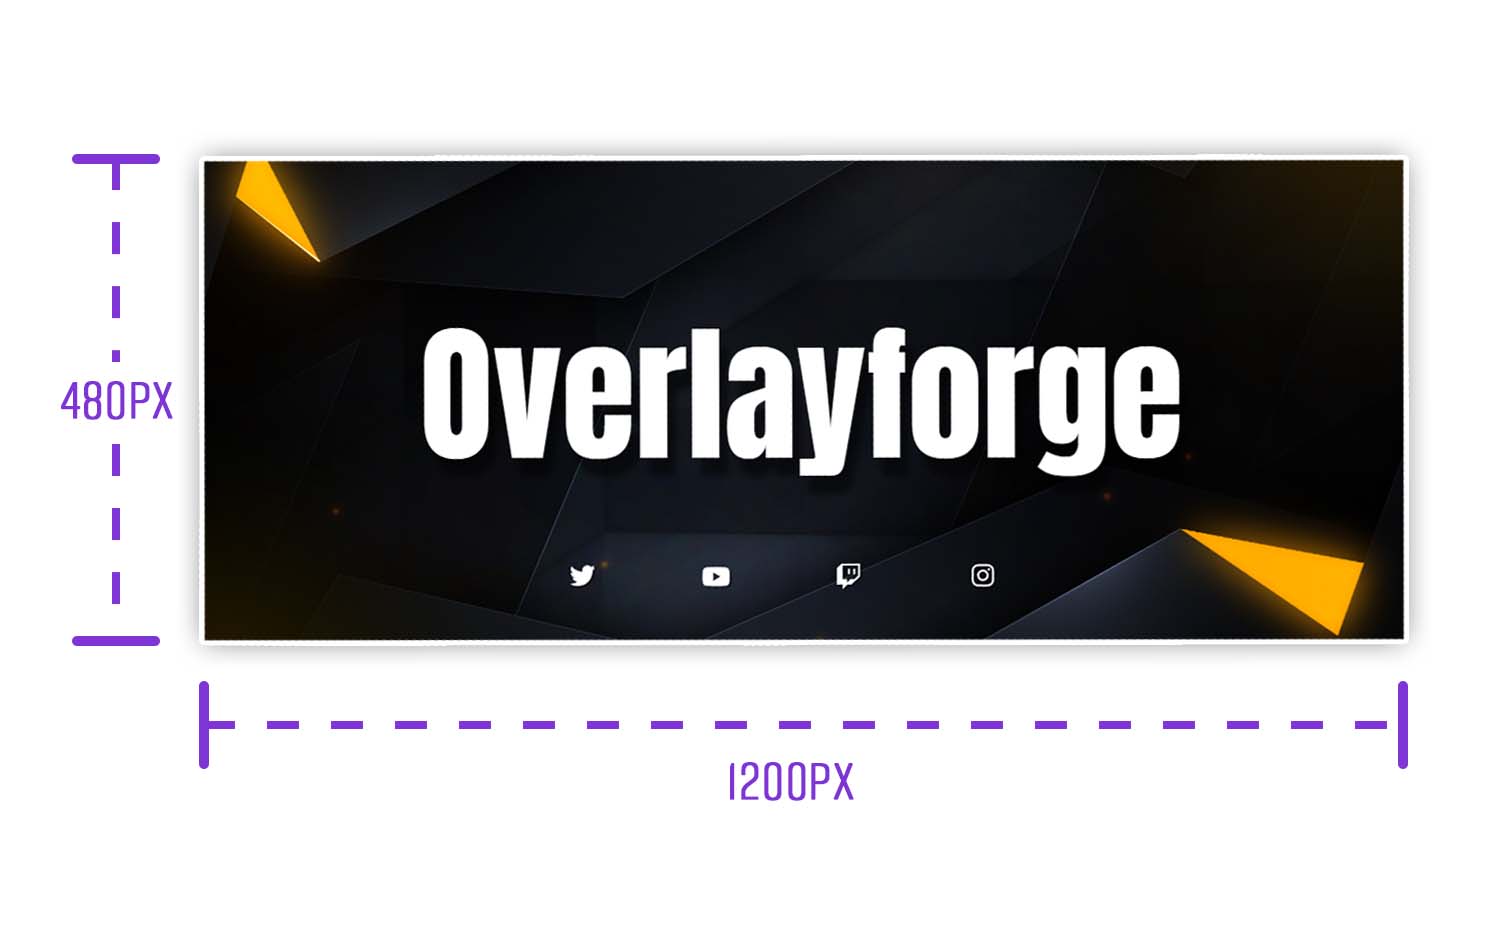 Showing the perfect Layout and Sizes for Twitch Banners